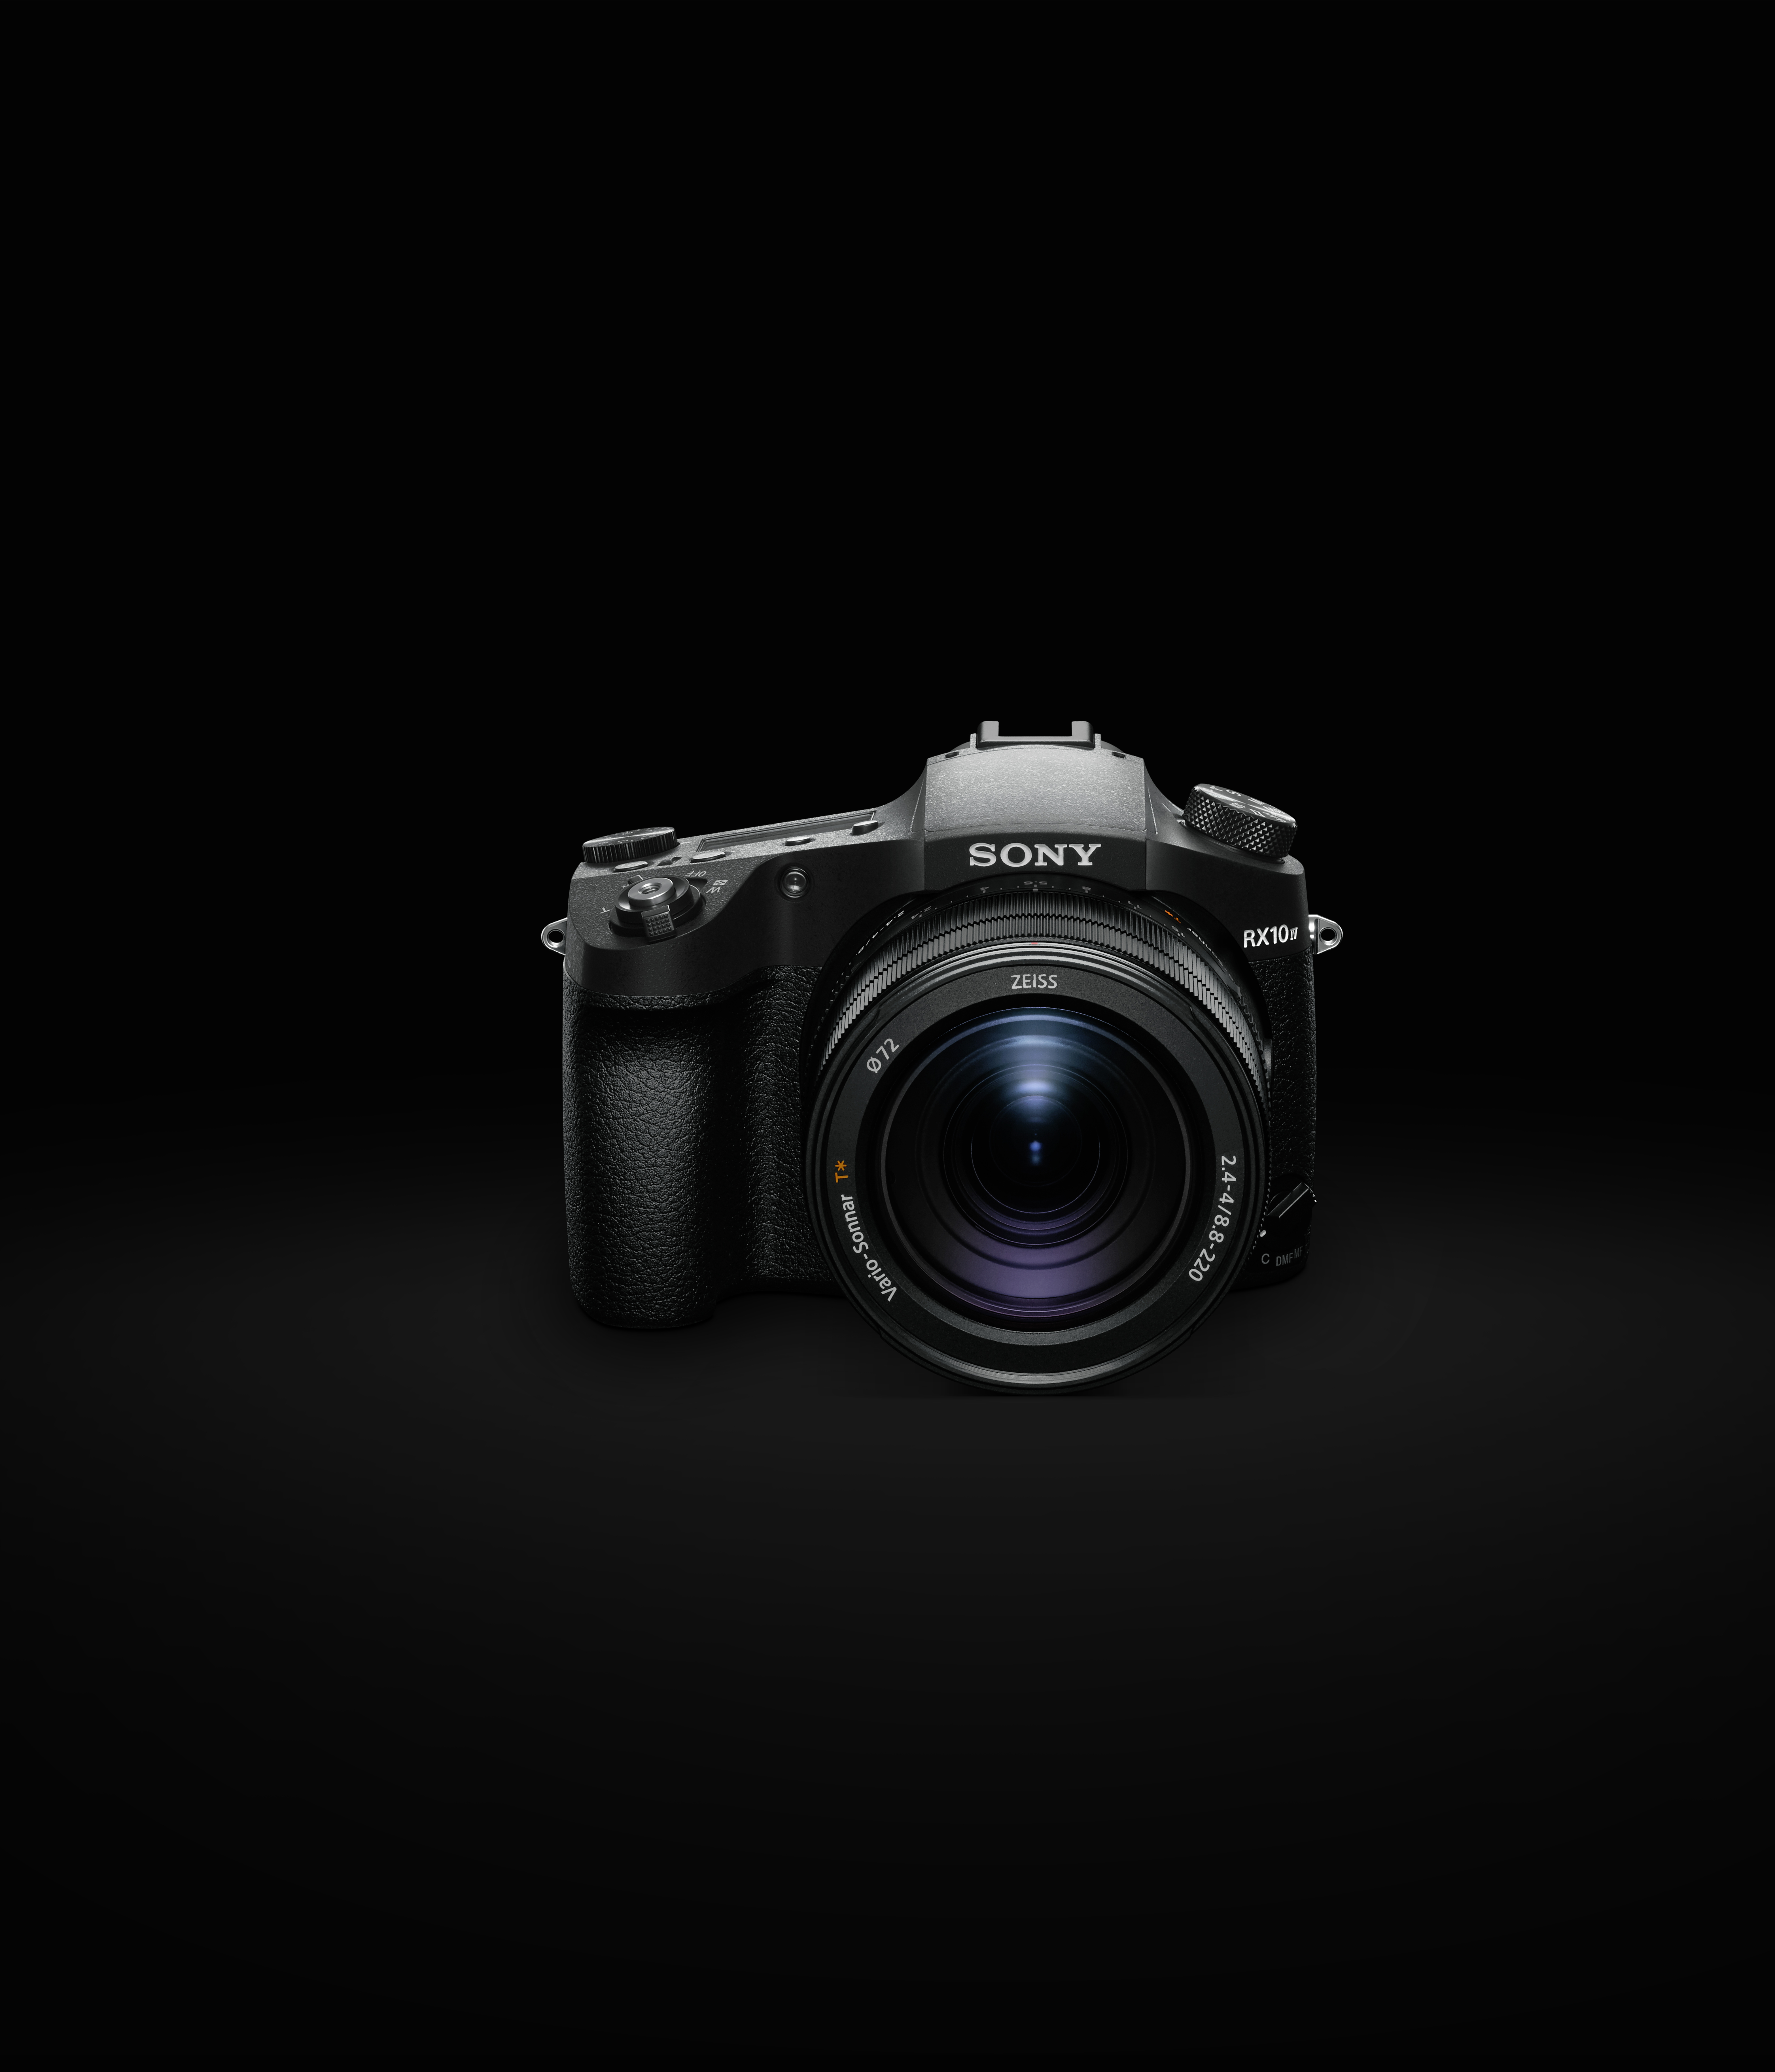 Free Update Adds Real-Time Animal Eye AF to the Sony RX10 IV